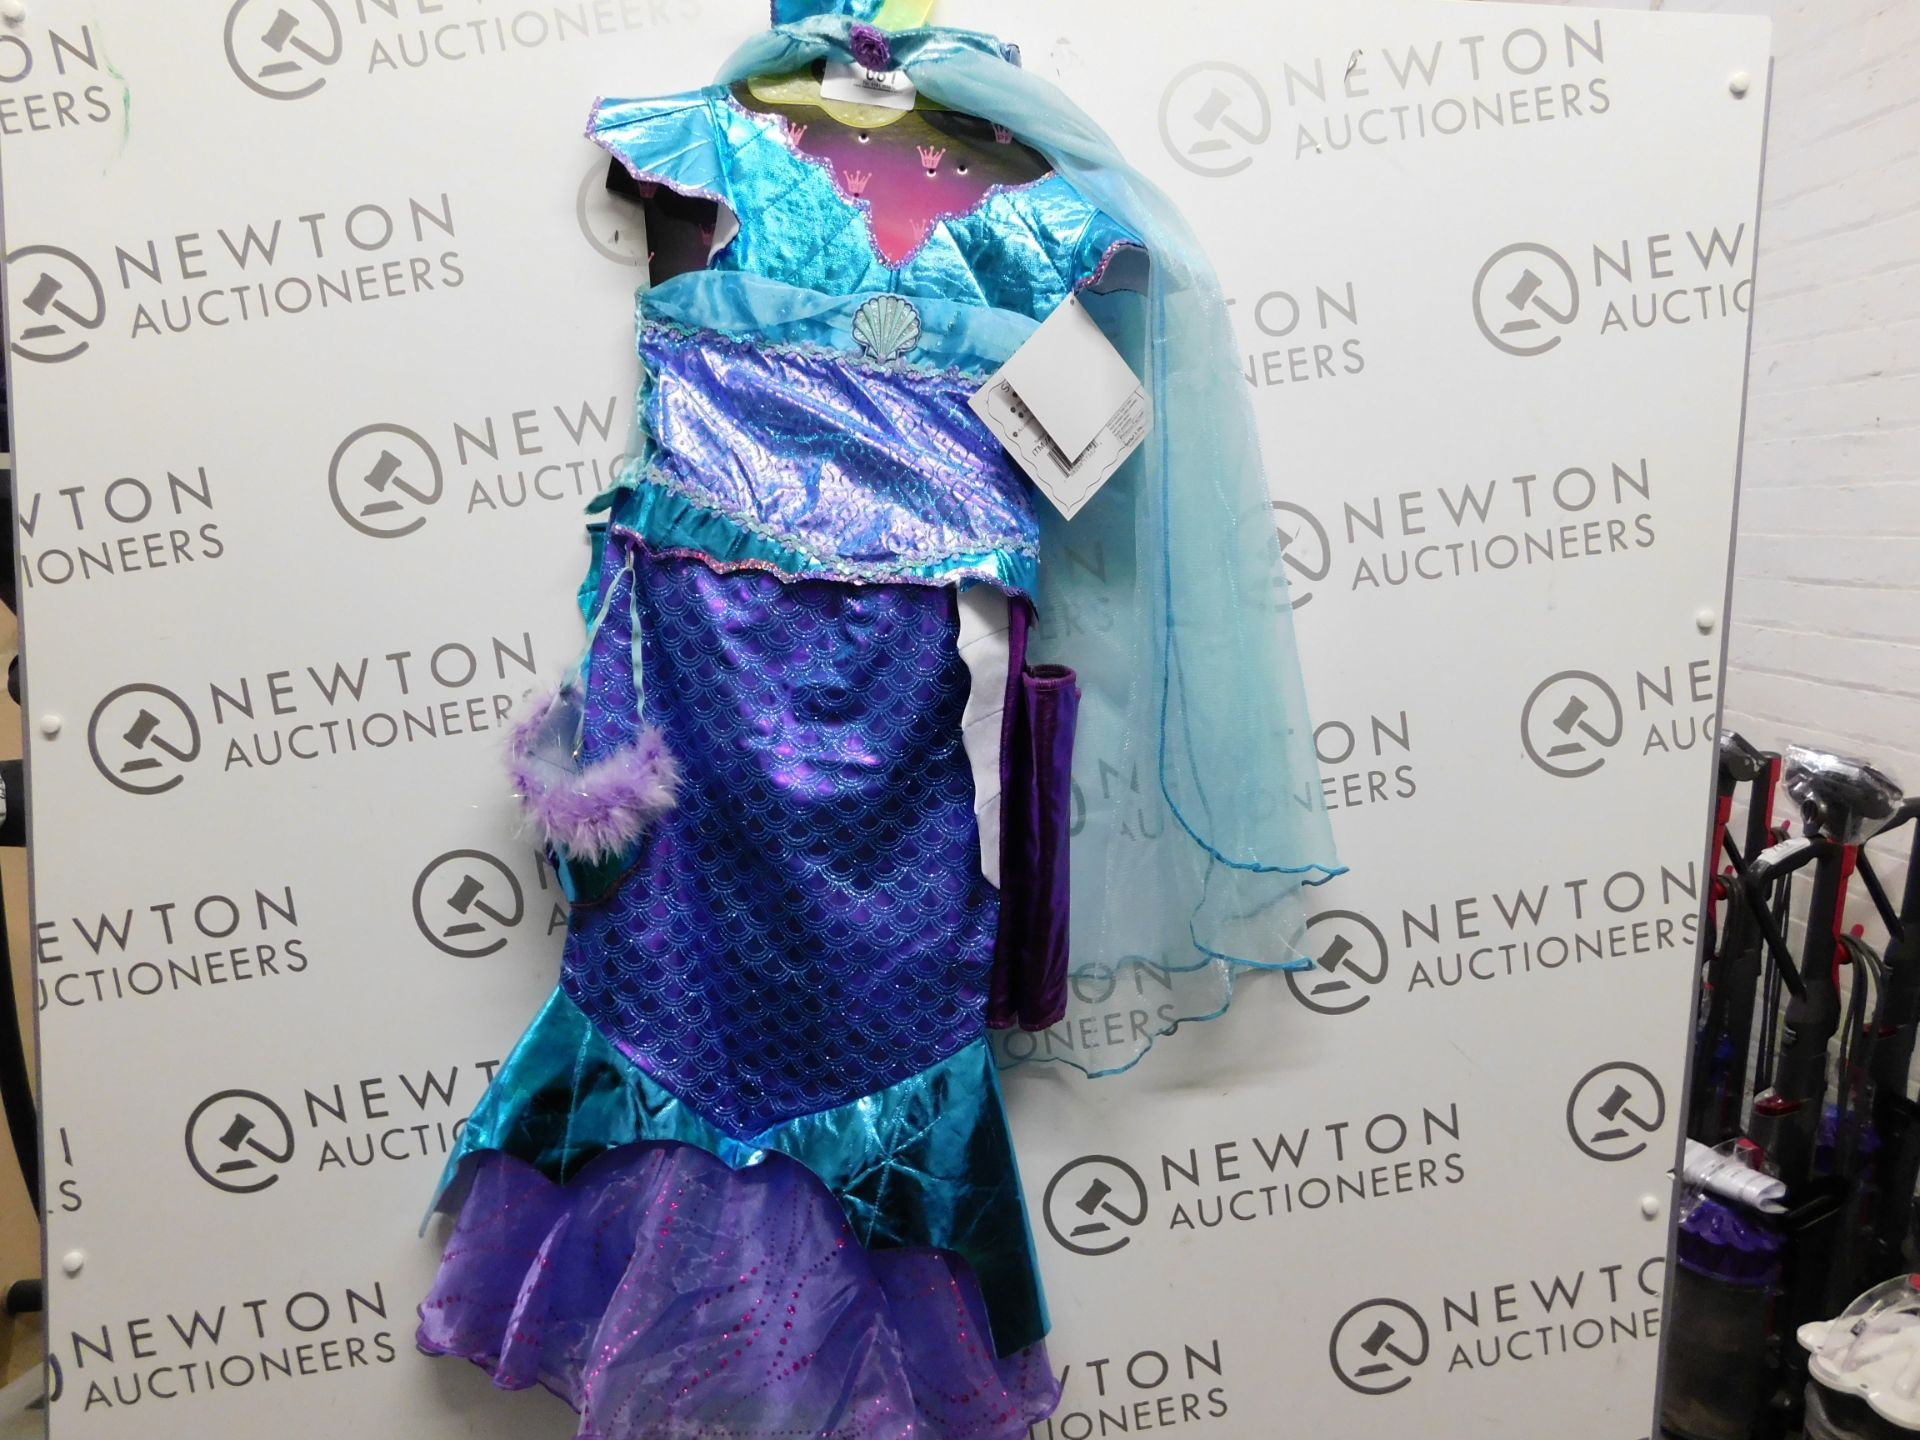 1 CHILDRENS TEETOTS SPARKLY MERMAID COSTUME AGES 5-6 RRP £29.99